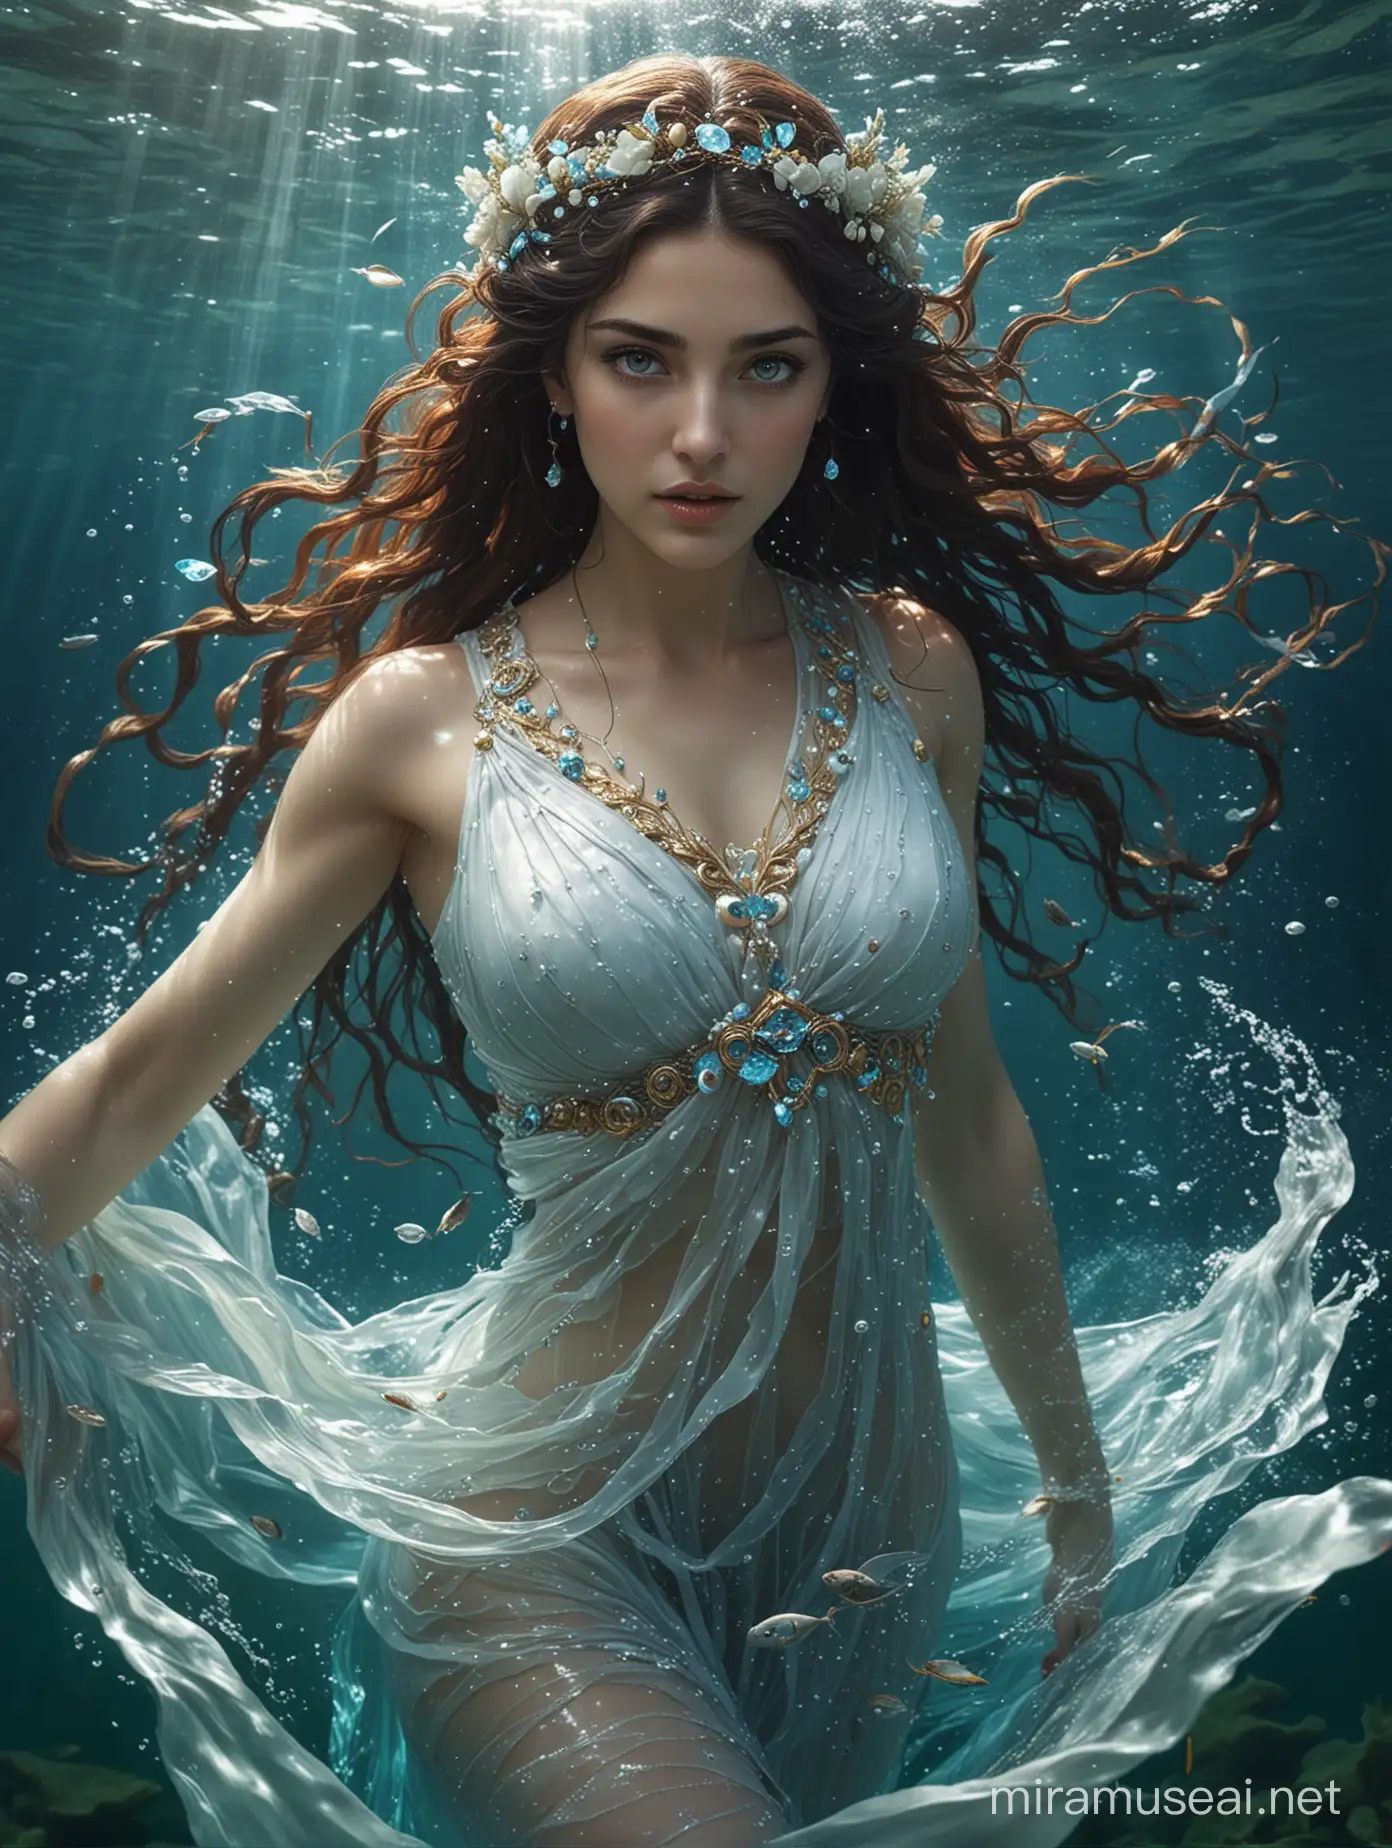 A masterpieced of Kimiya Hosseini as Leucothea, Greek goddess of the sea. She is under the sea, and her Greek dress flows ethereally in the water until it mixes with the water until it disappears. She has has blue eyes.


